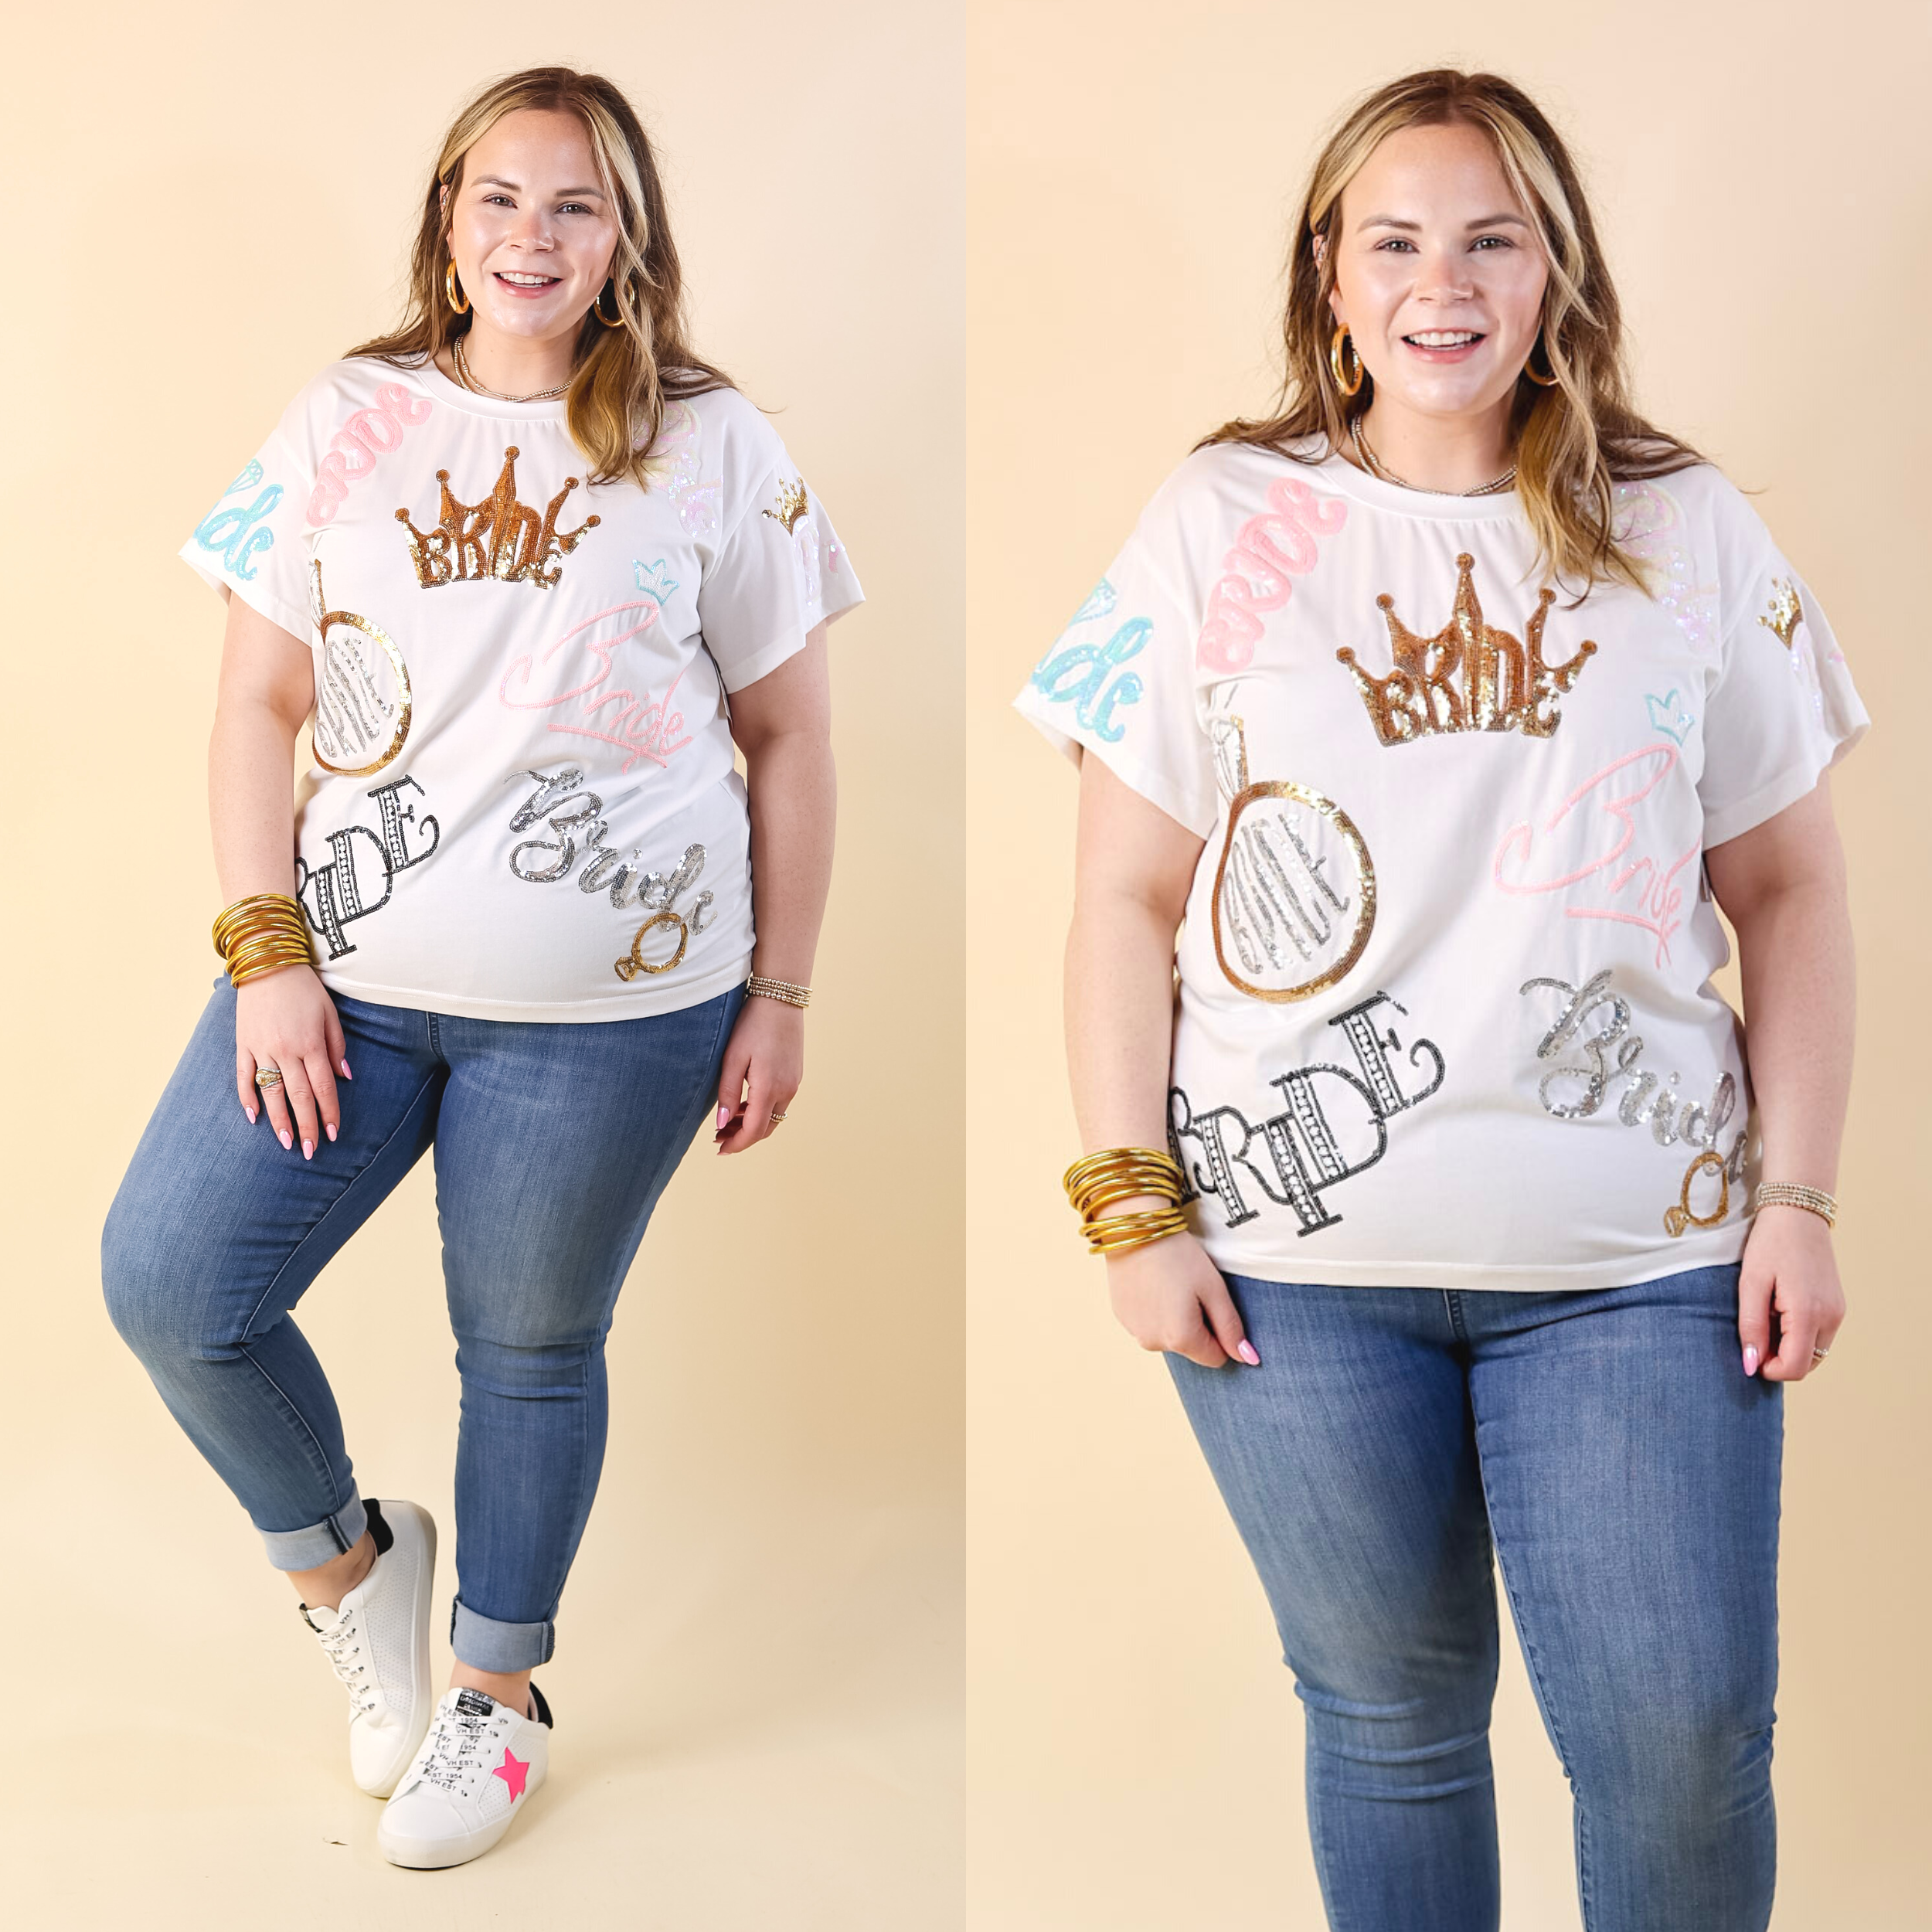 Queen Of Sparkles | Happily Ever After Bride Fully Sequin Short Sleeve Tee in White - Giddy Up Glamour Boutique